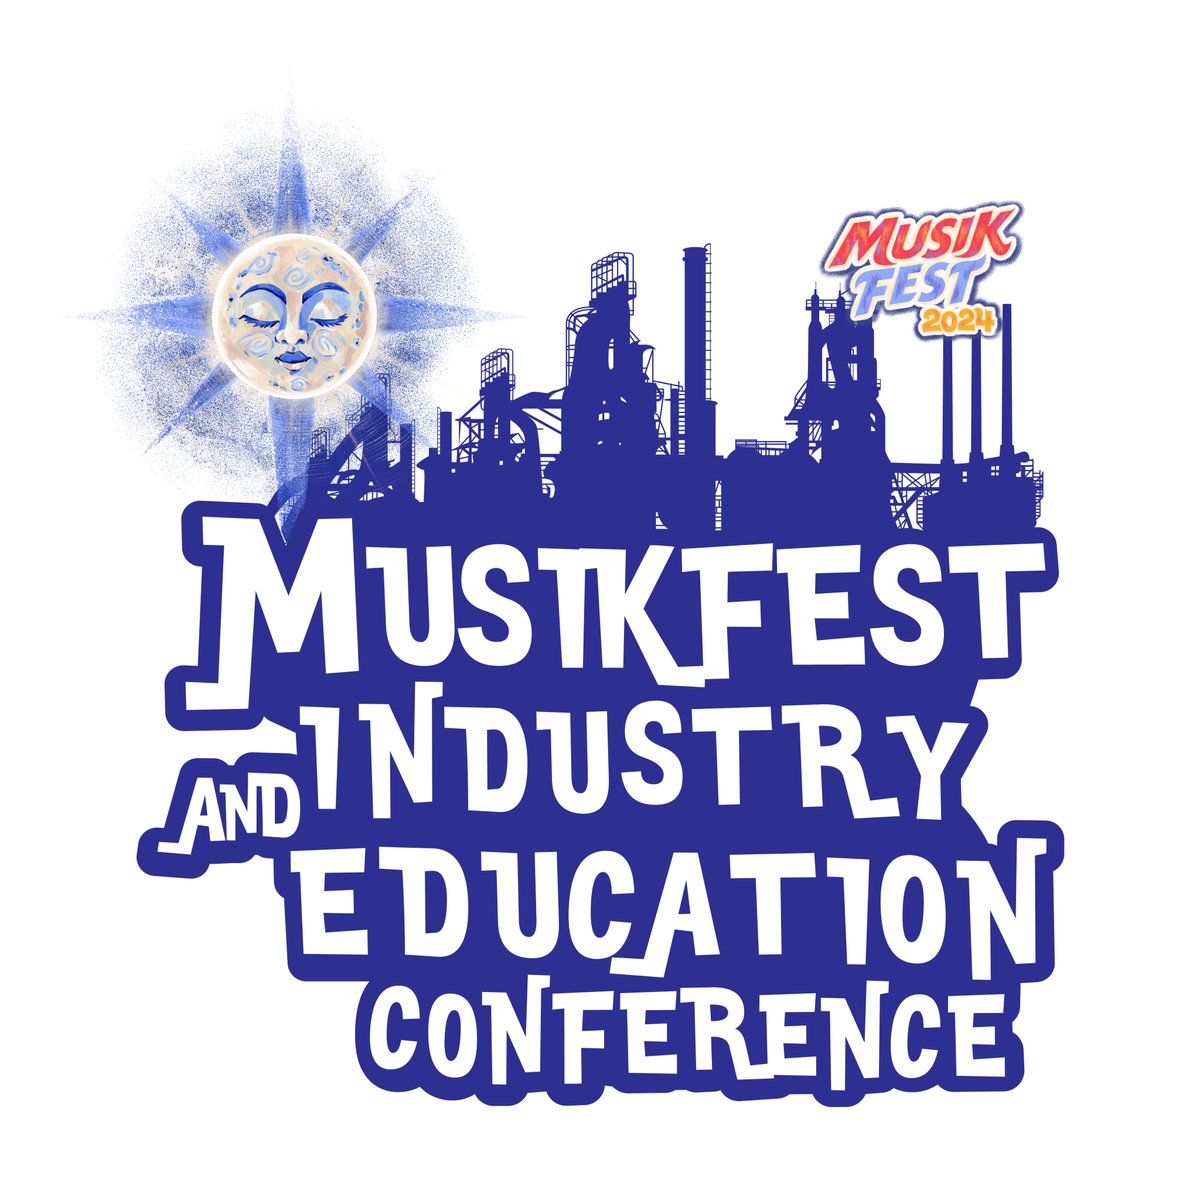 We're excited to be part of a new event happening this August - the Musikfest Industry and Education Conference. It happens August 1st and 2nd in the Lehigh Valley and is designed to explore the intersection of music education and music business. musikfest.org/lineup/musikfe…